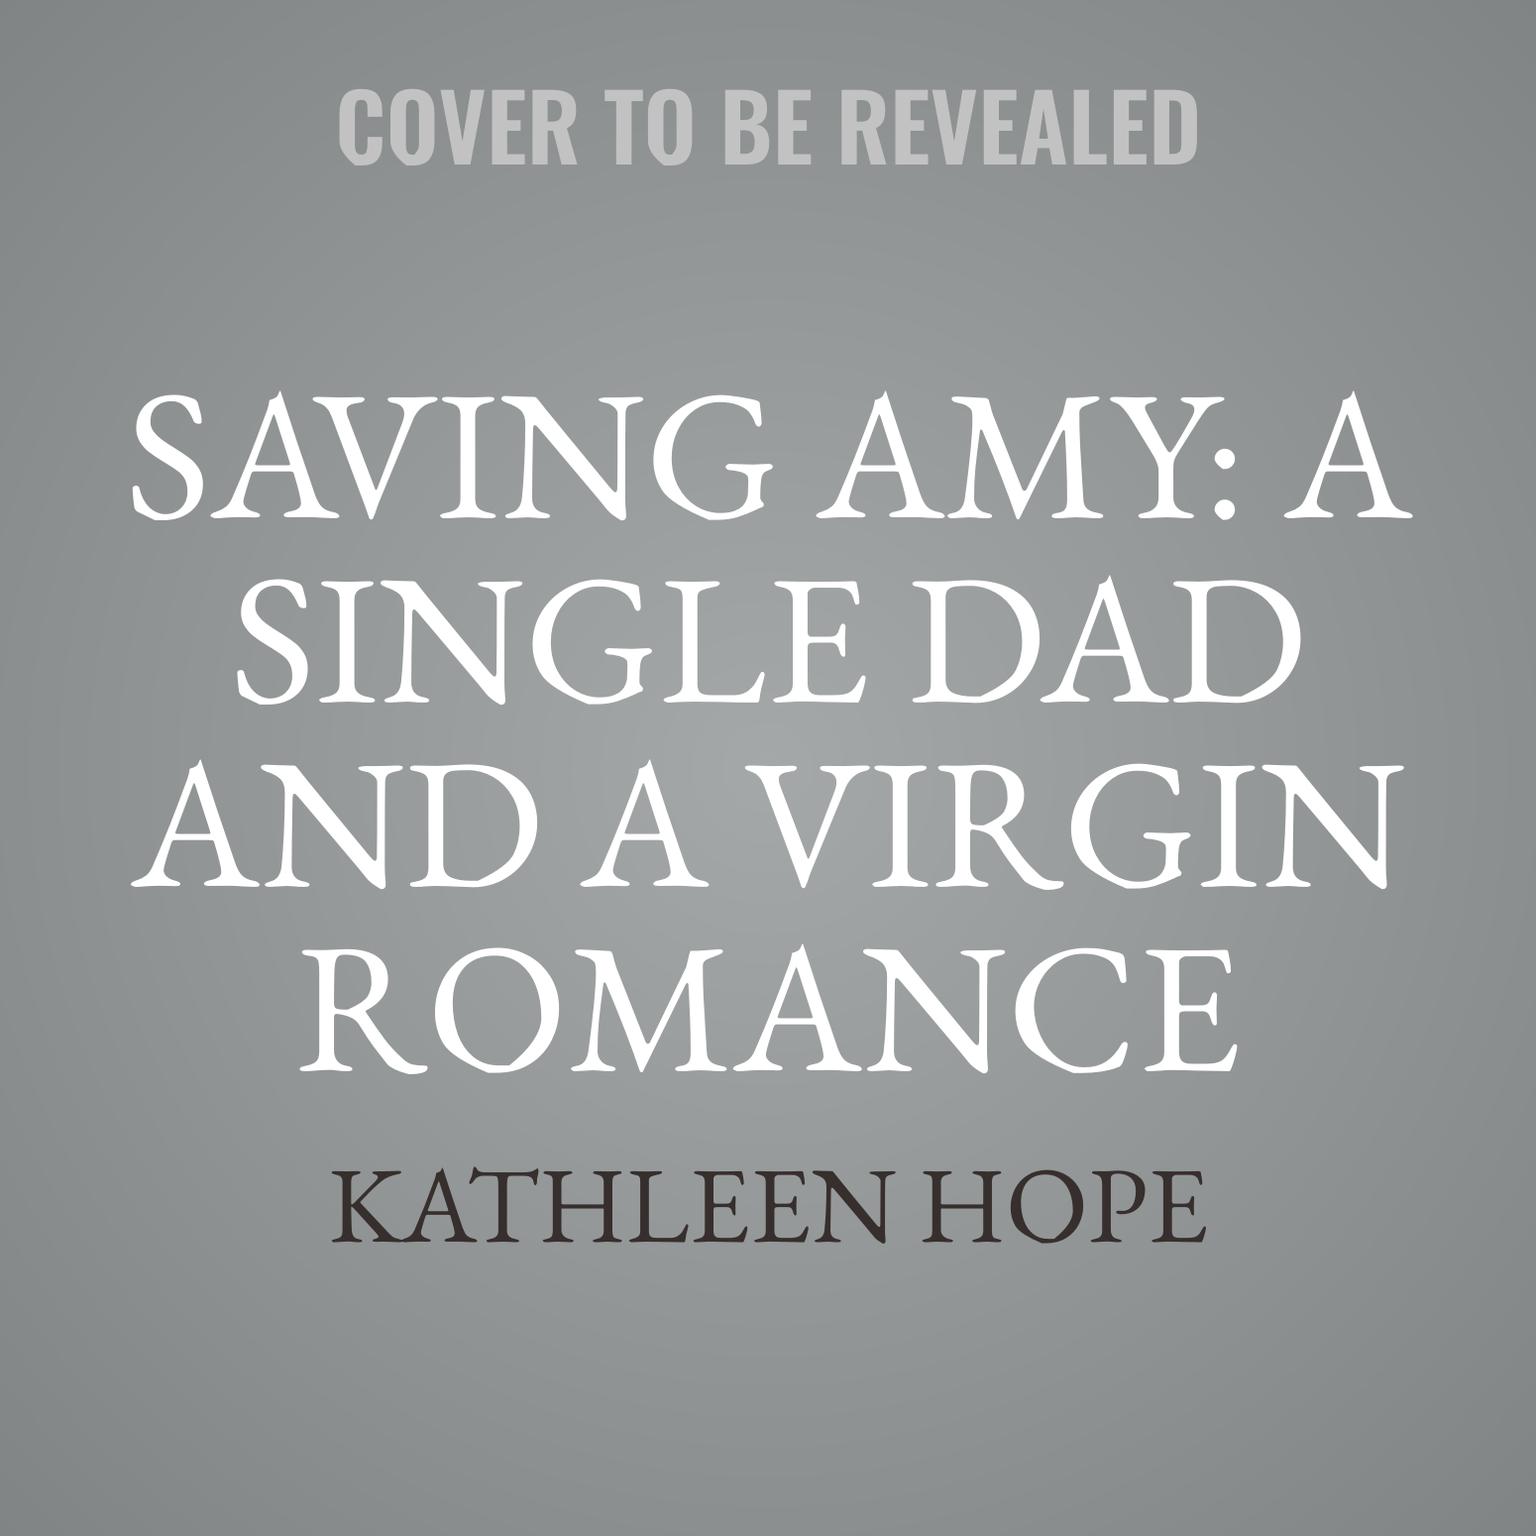 Saving Amy: A Single Dad and a Virgin Romance Audiobook, by Kathleen Hope